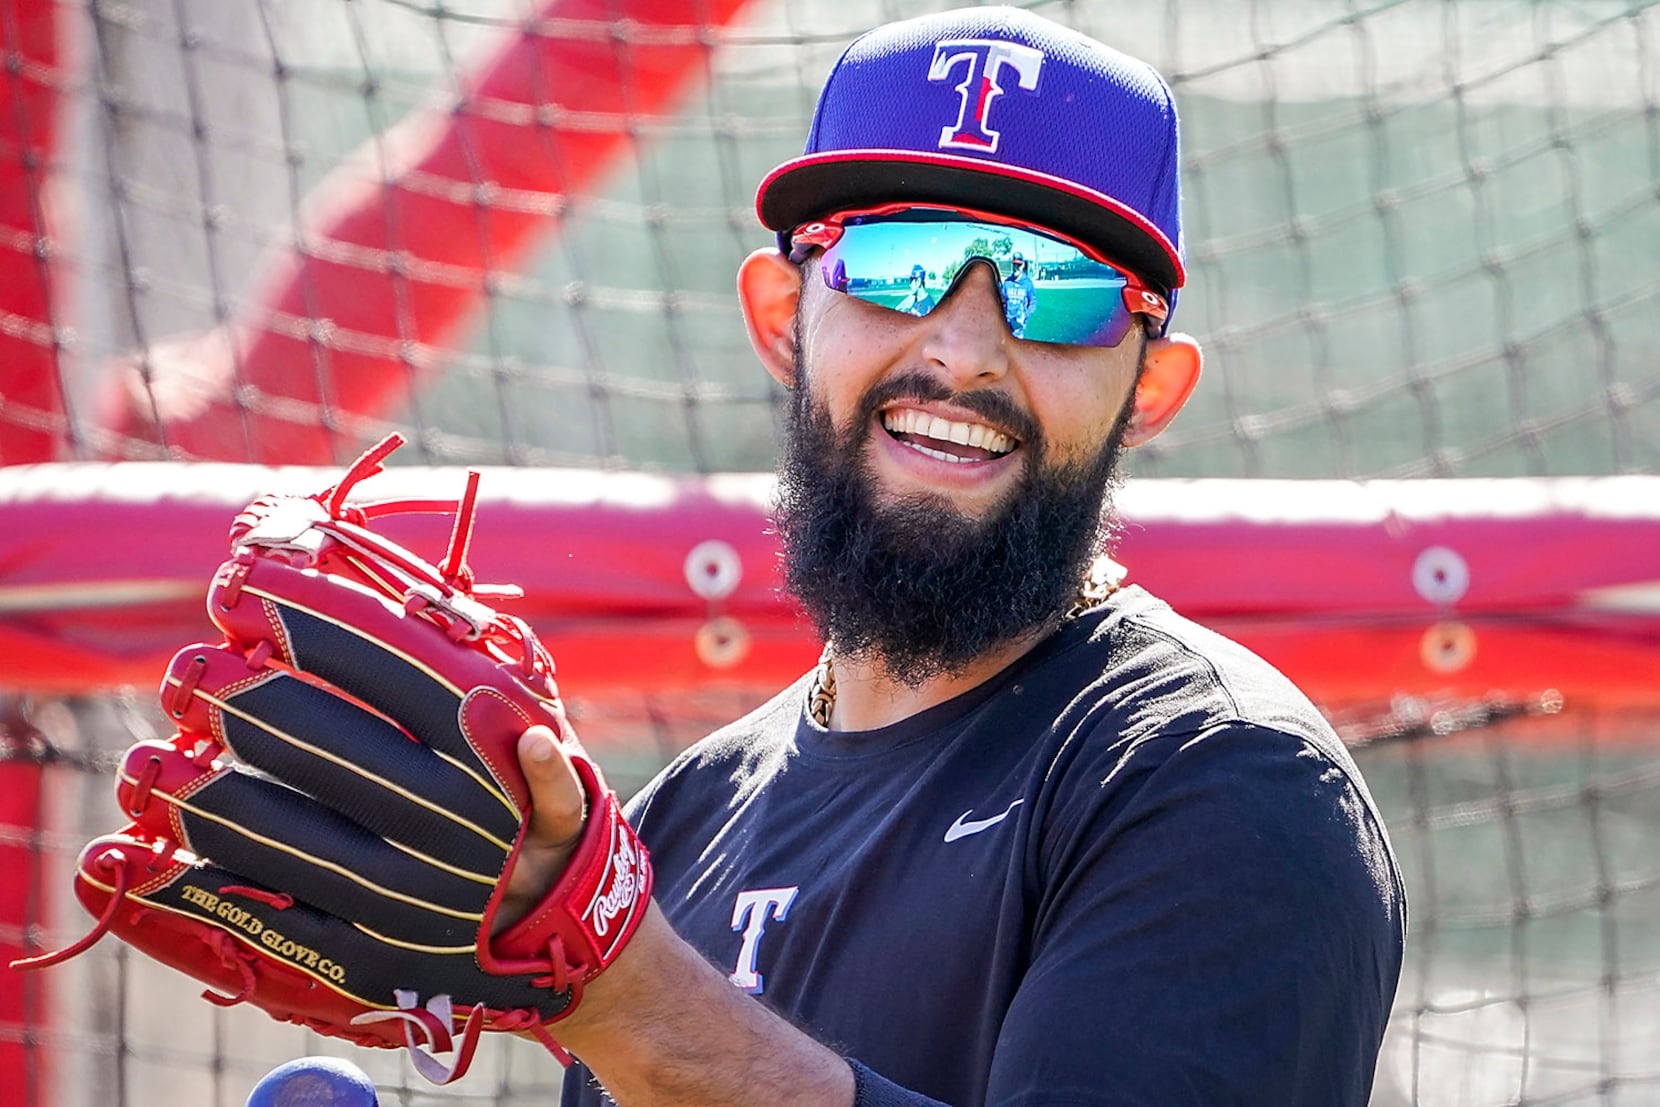 Rangers hope Odor can turn things around late, carry momentum to bring back  good Rougie in 2019